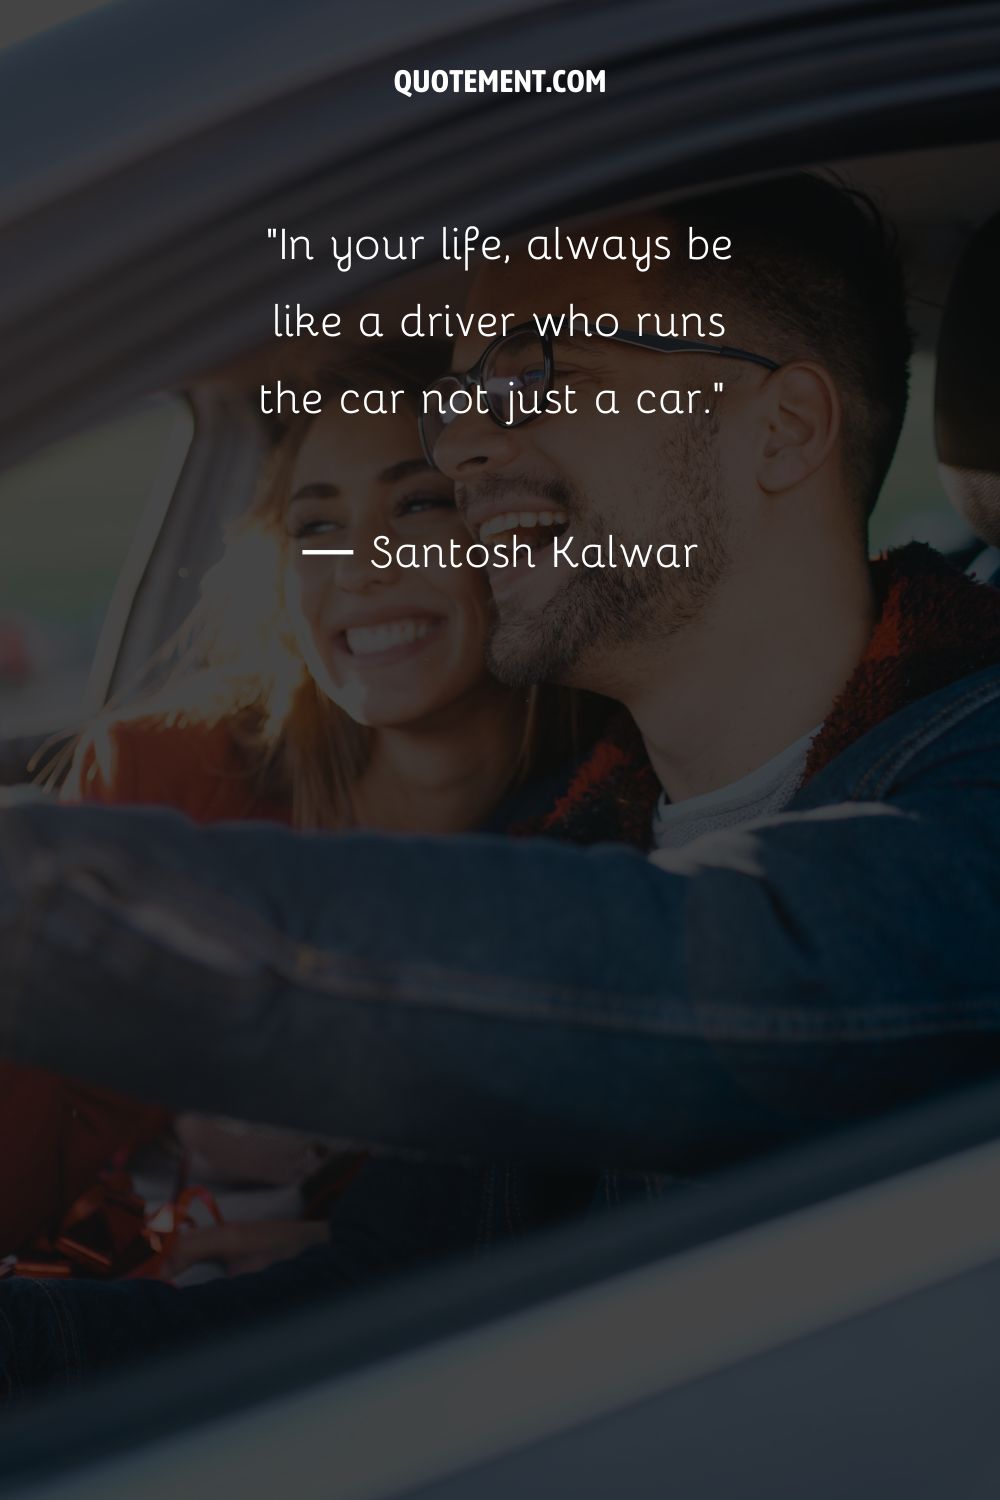 In your life, always be like a driver who runs the car not just a car